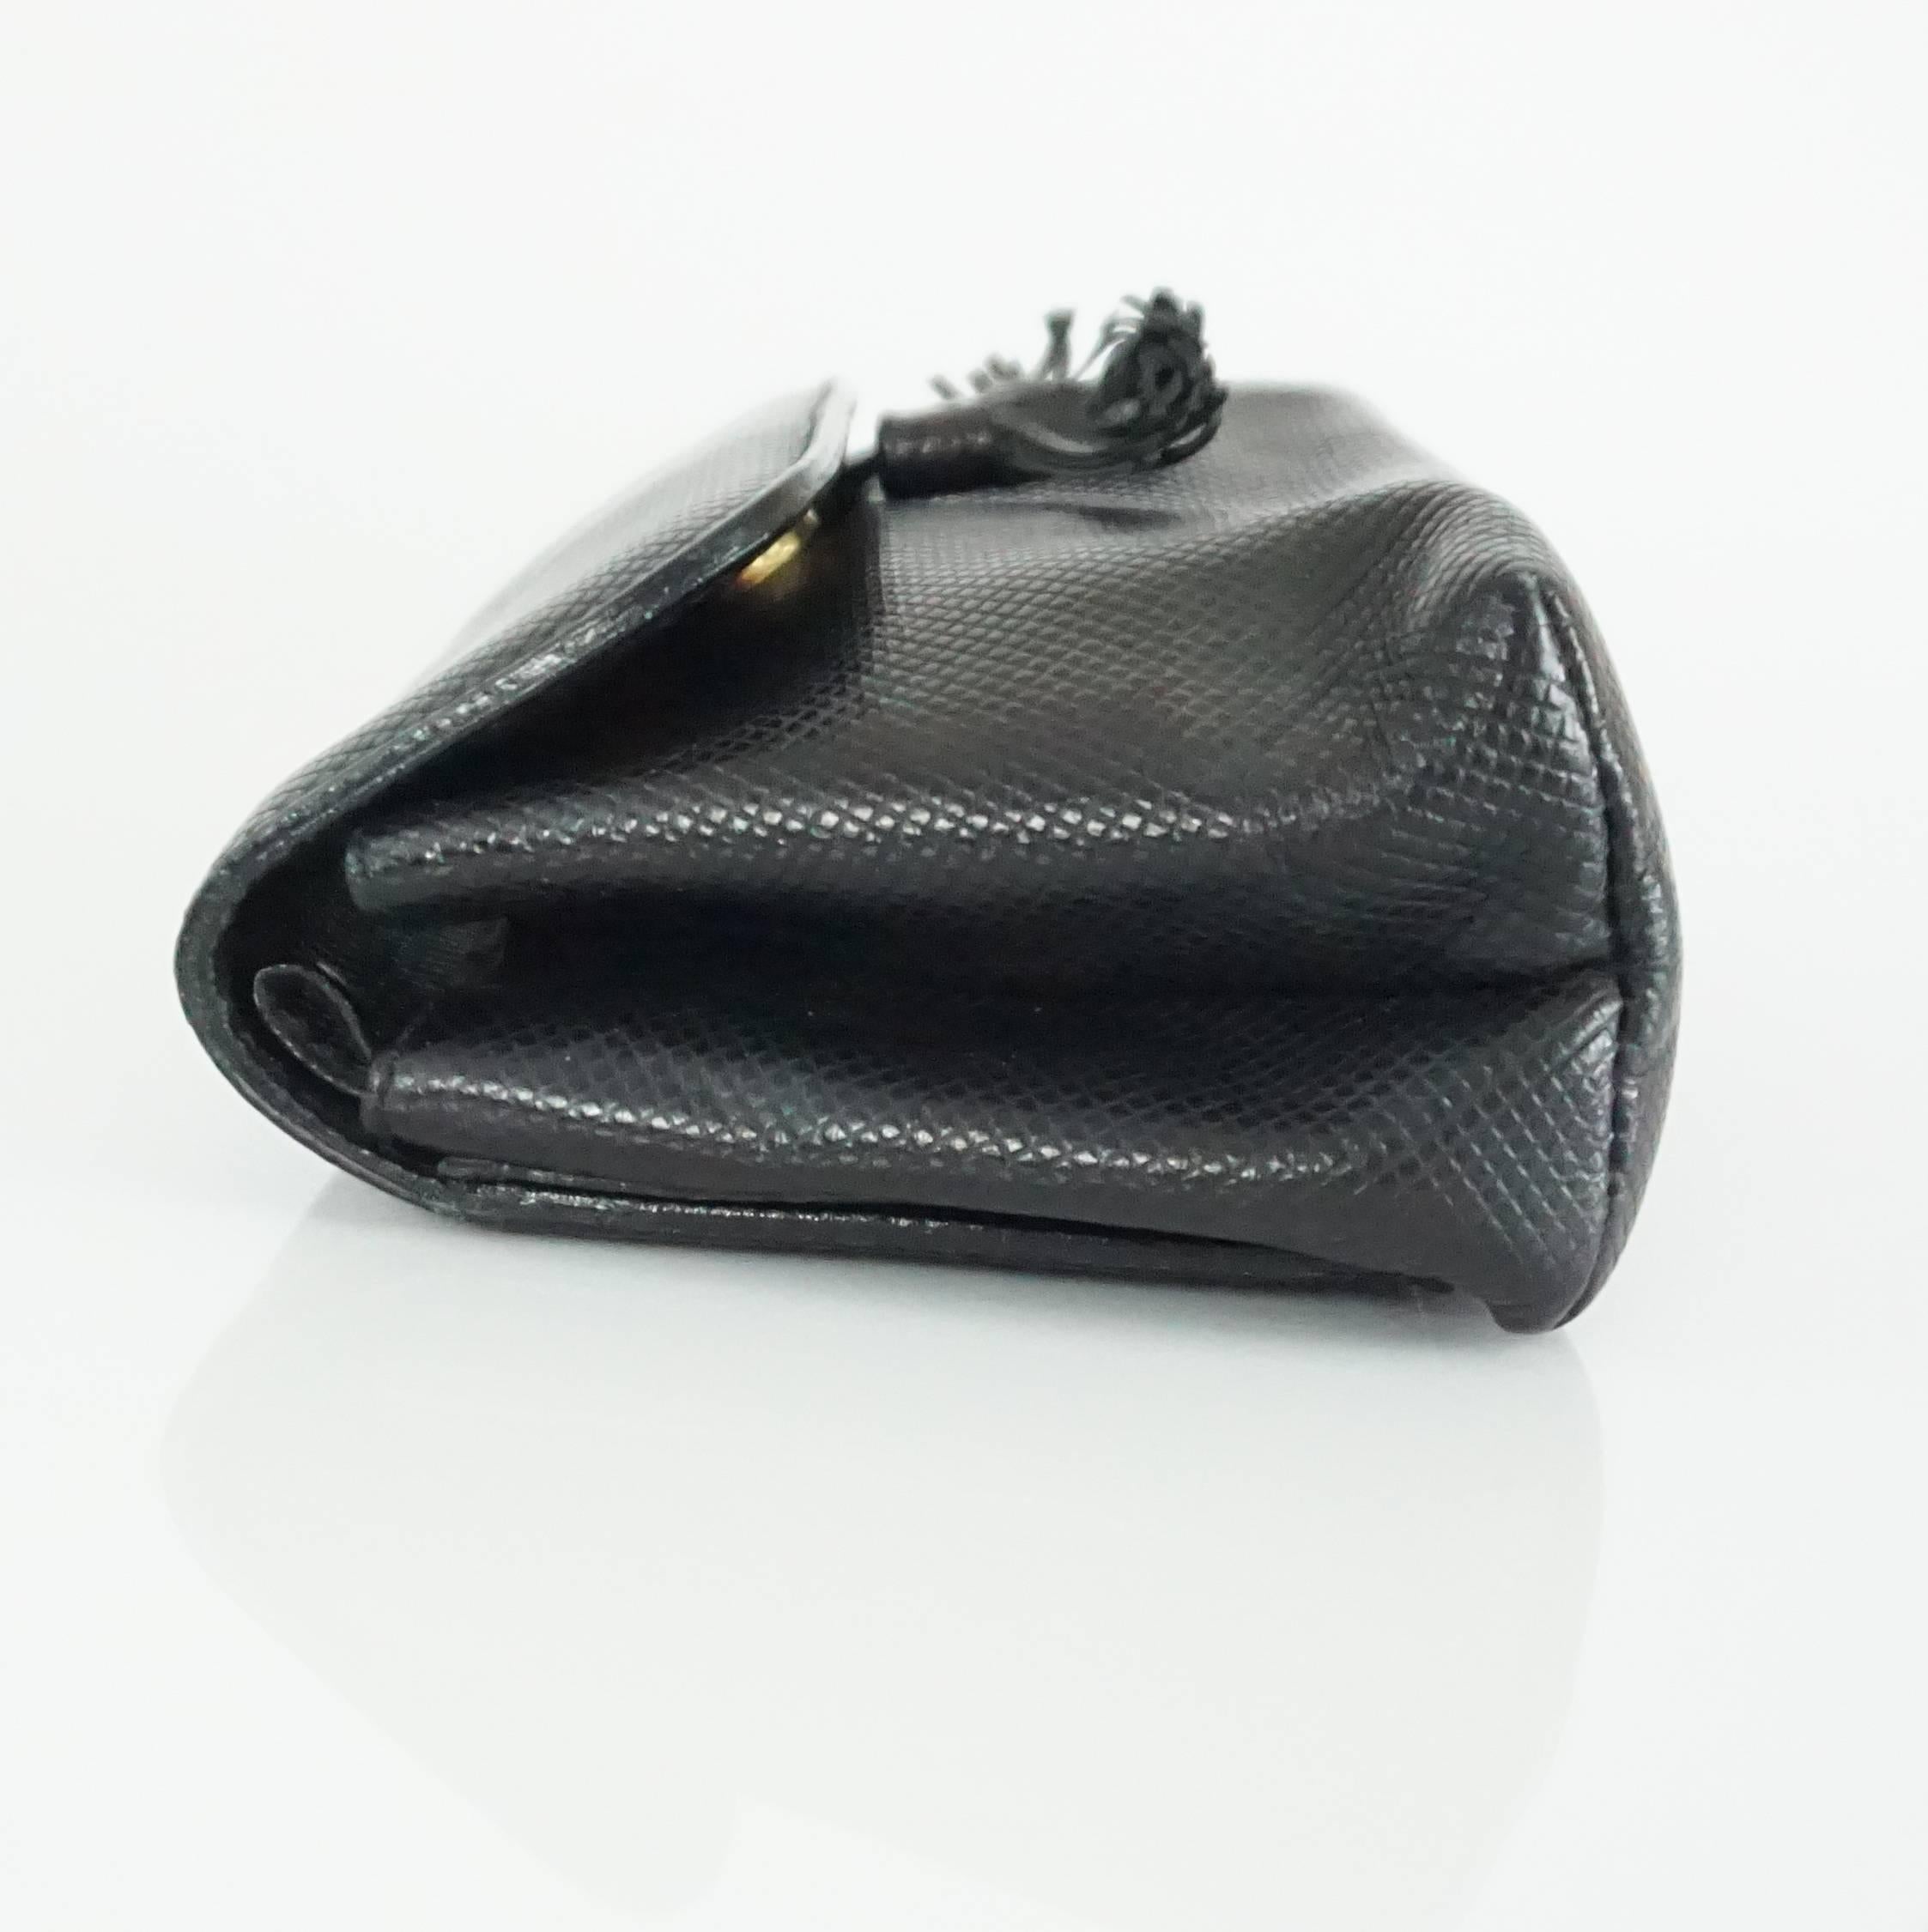 This Bottega Veneta small clutch is black embossed leather. There is a decorative tassel on the front, a snap closure, and an inside pocket. This clutch is in good condition with minor wear on a corner and the tassel being slightly frayed (see